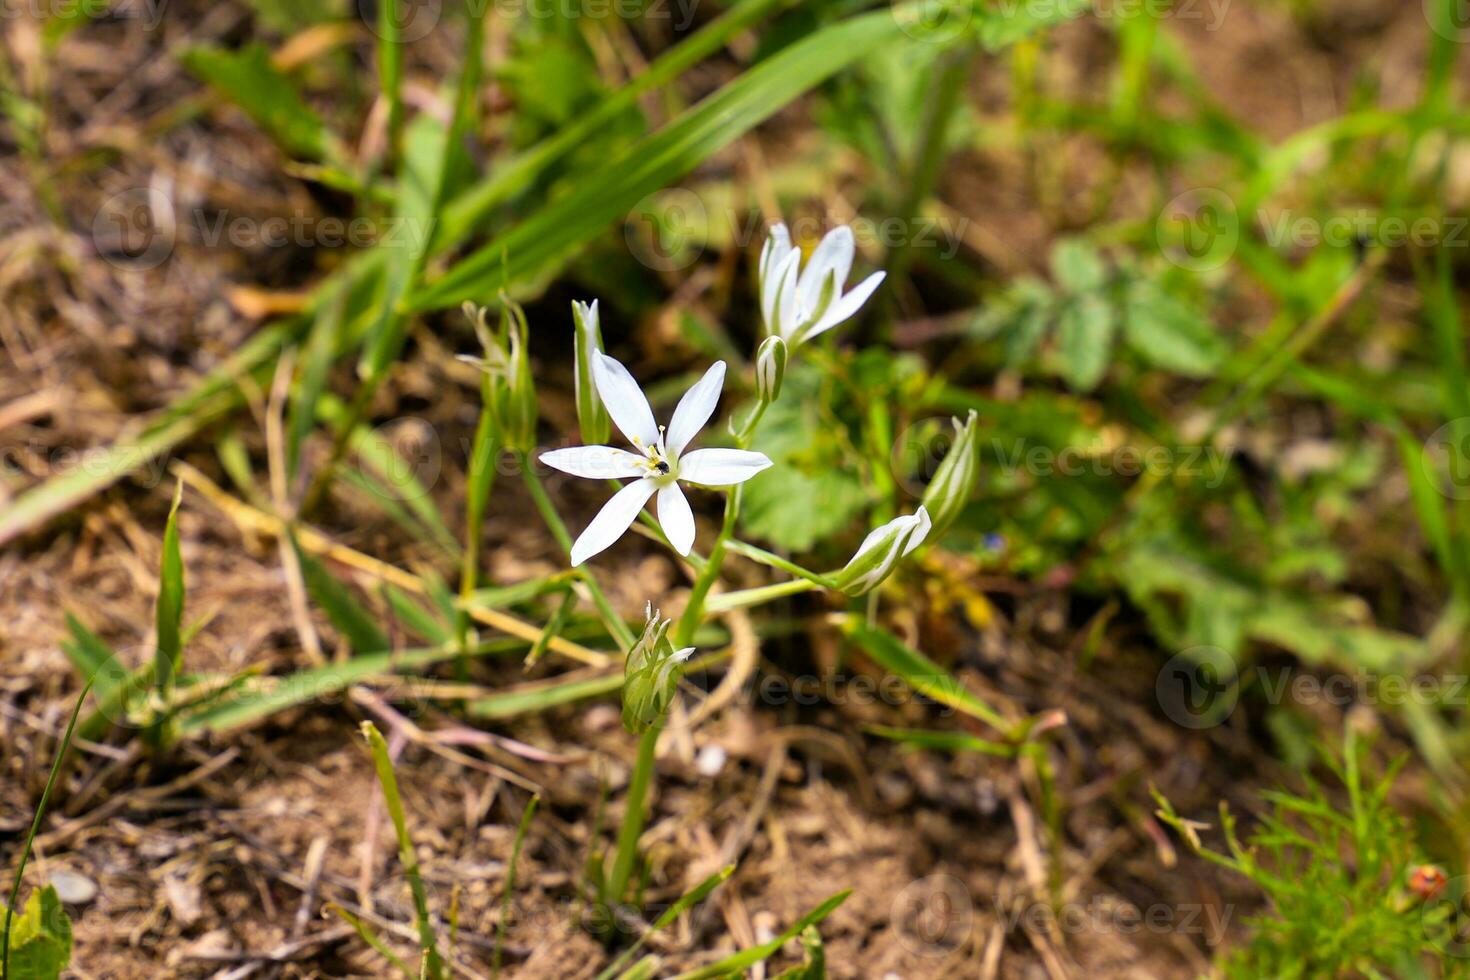 Ornithogalum flowers. beautiful bloom in the spring garden. Many white flowers of Ornithogalum. Ornithogalum umbellatum grass lily in bloom, small ornamental and wild white flowering photo